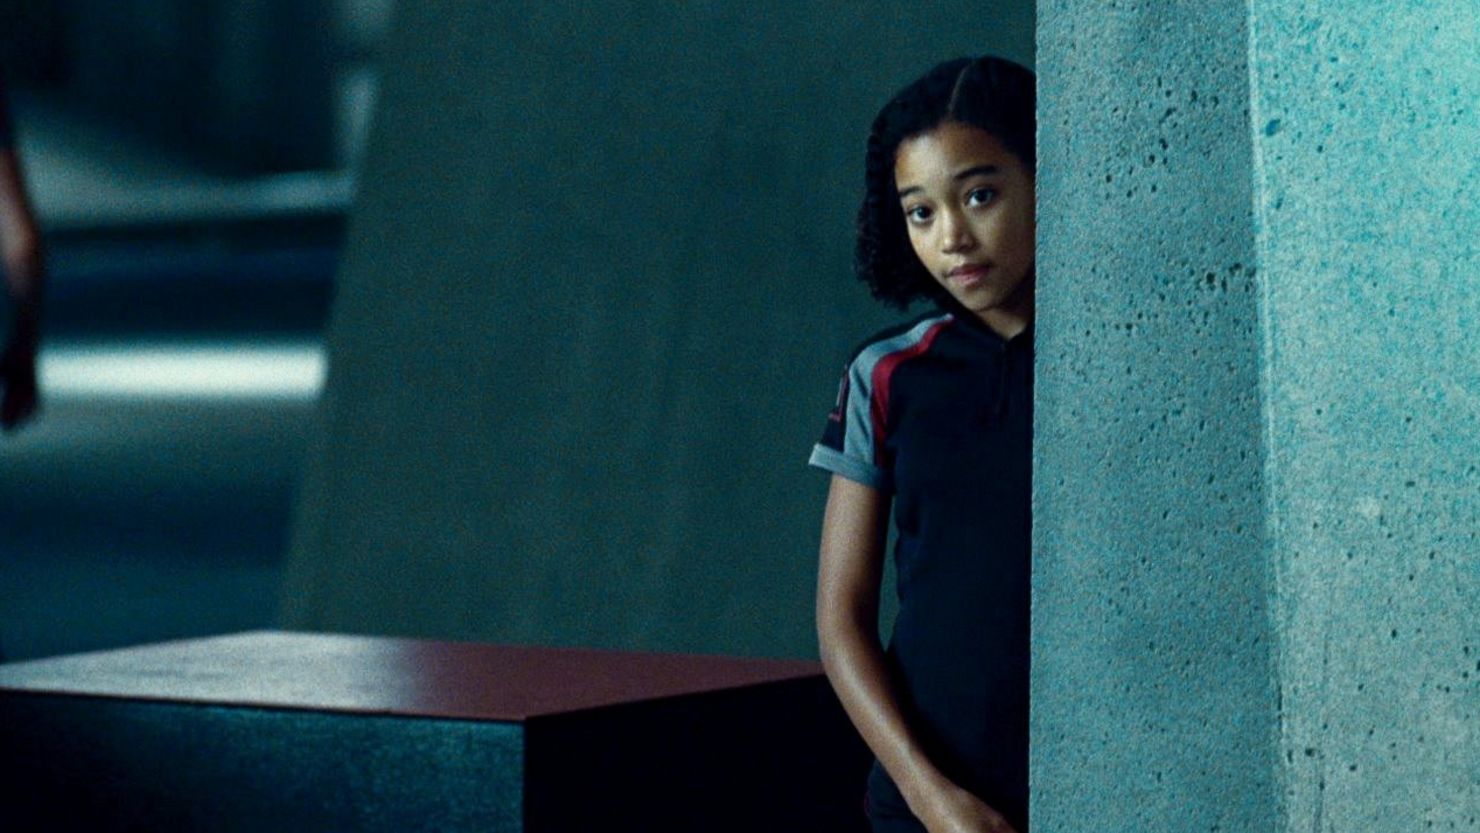 Rue, the doe-eyed heroine from "Hunger Games" who stole hearts, leads Nameberry's list.